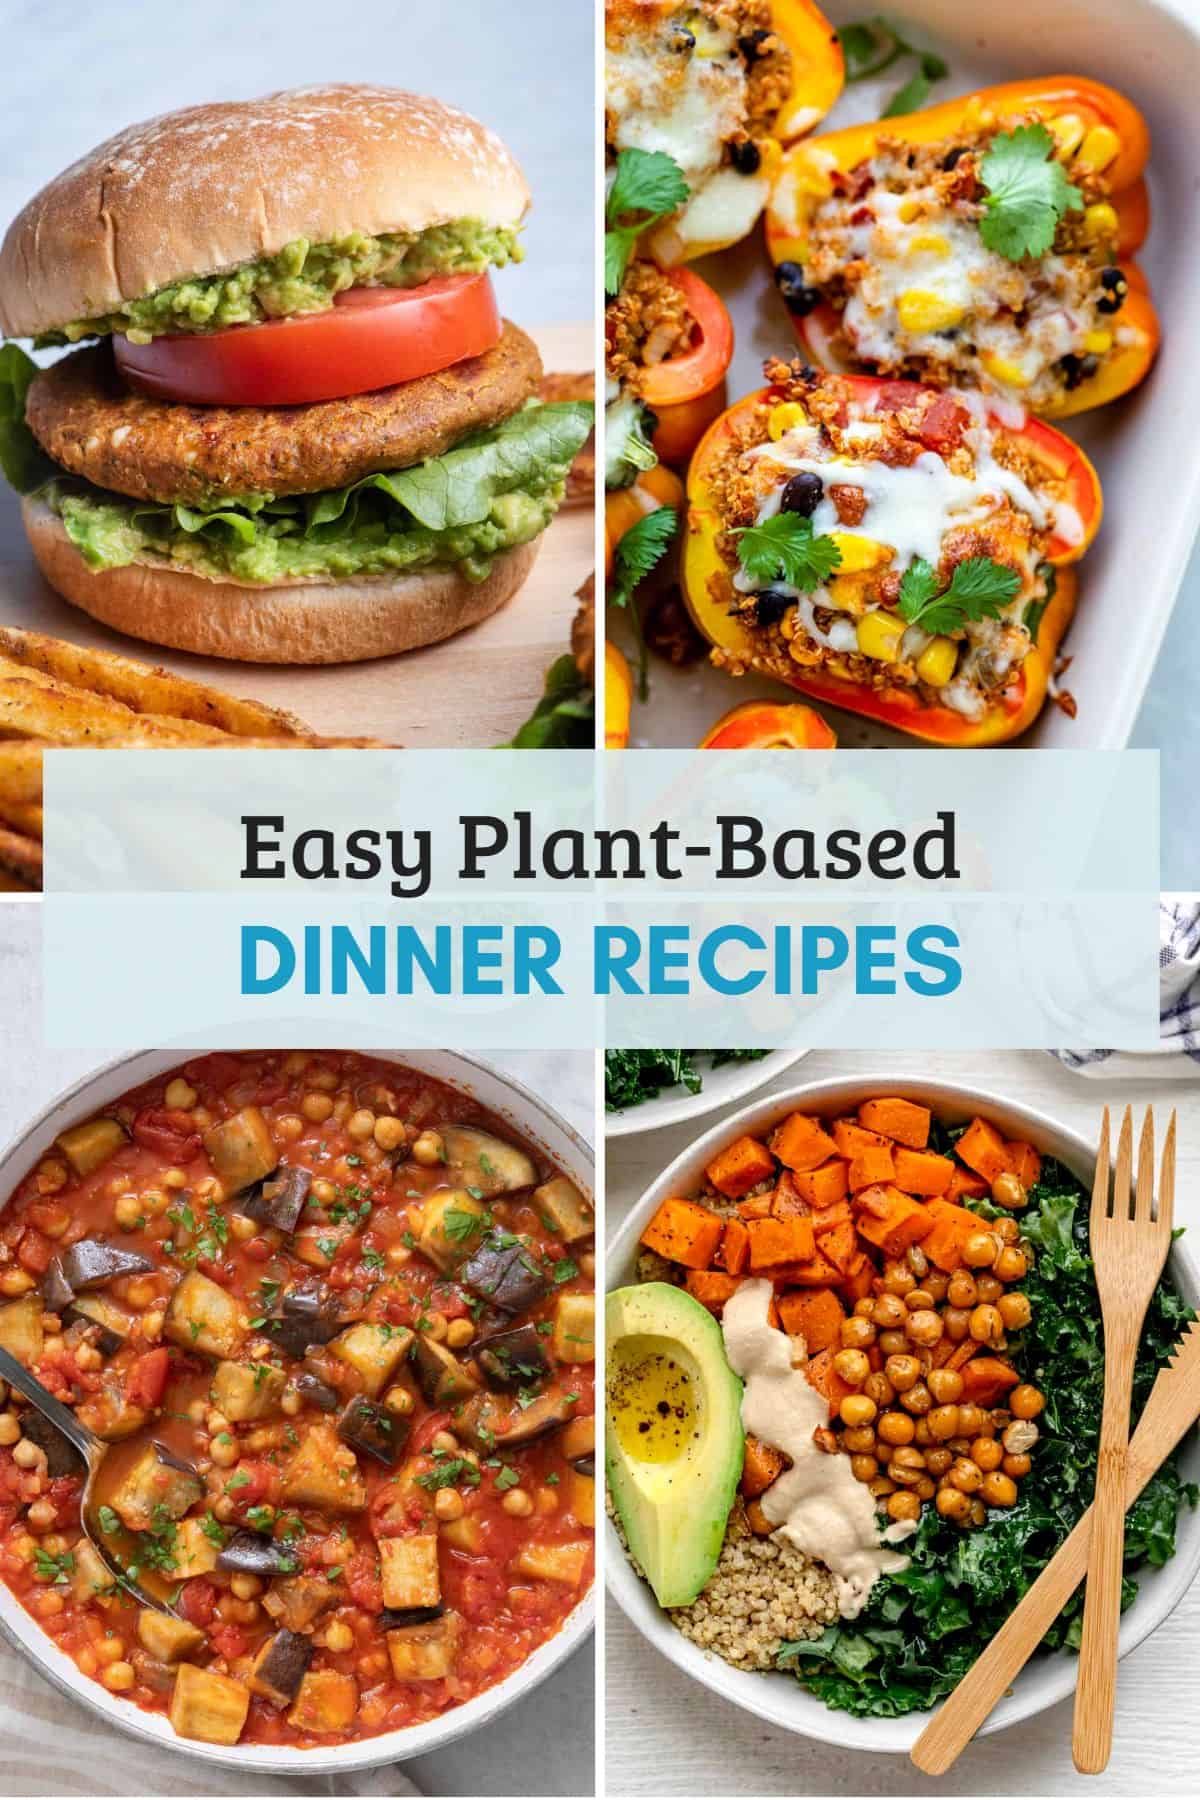 Plant-based diet recipes